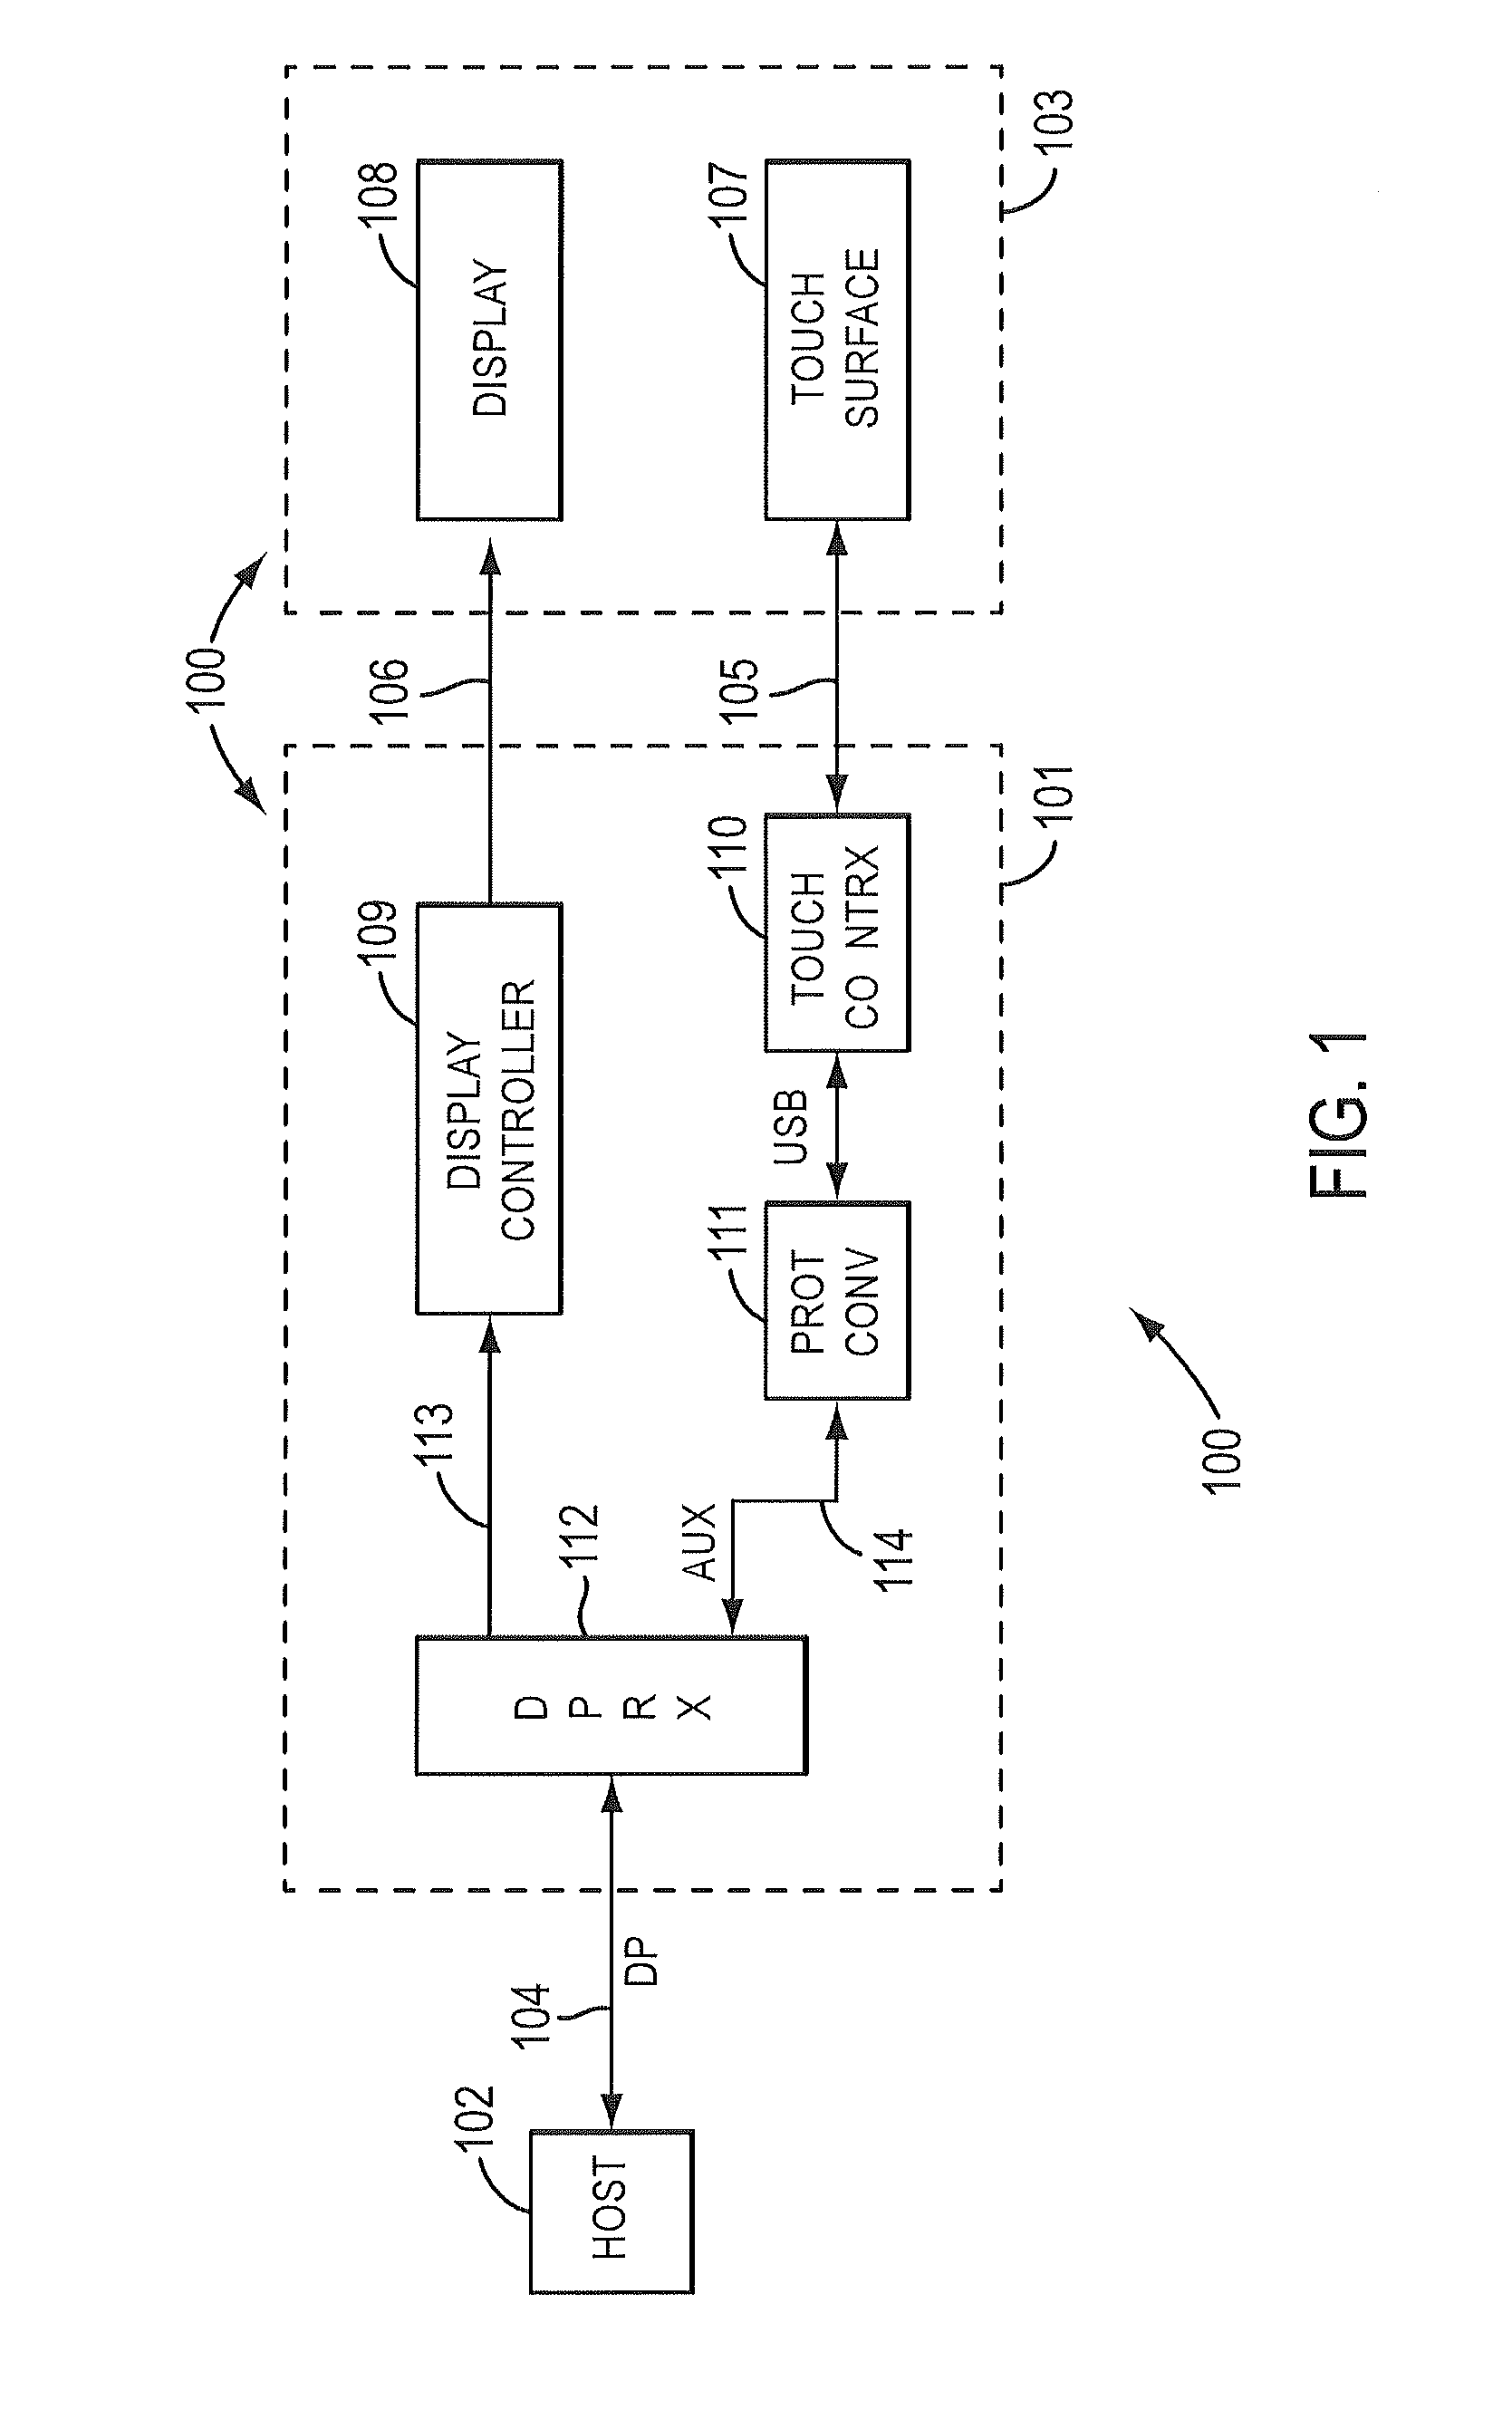 Integrated display and touch system with displayport/embedded displayport interface